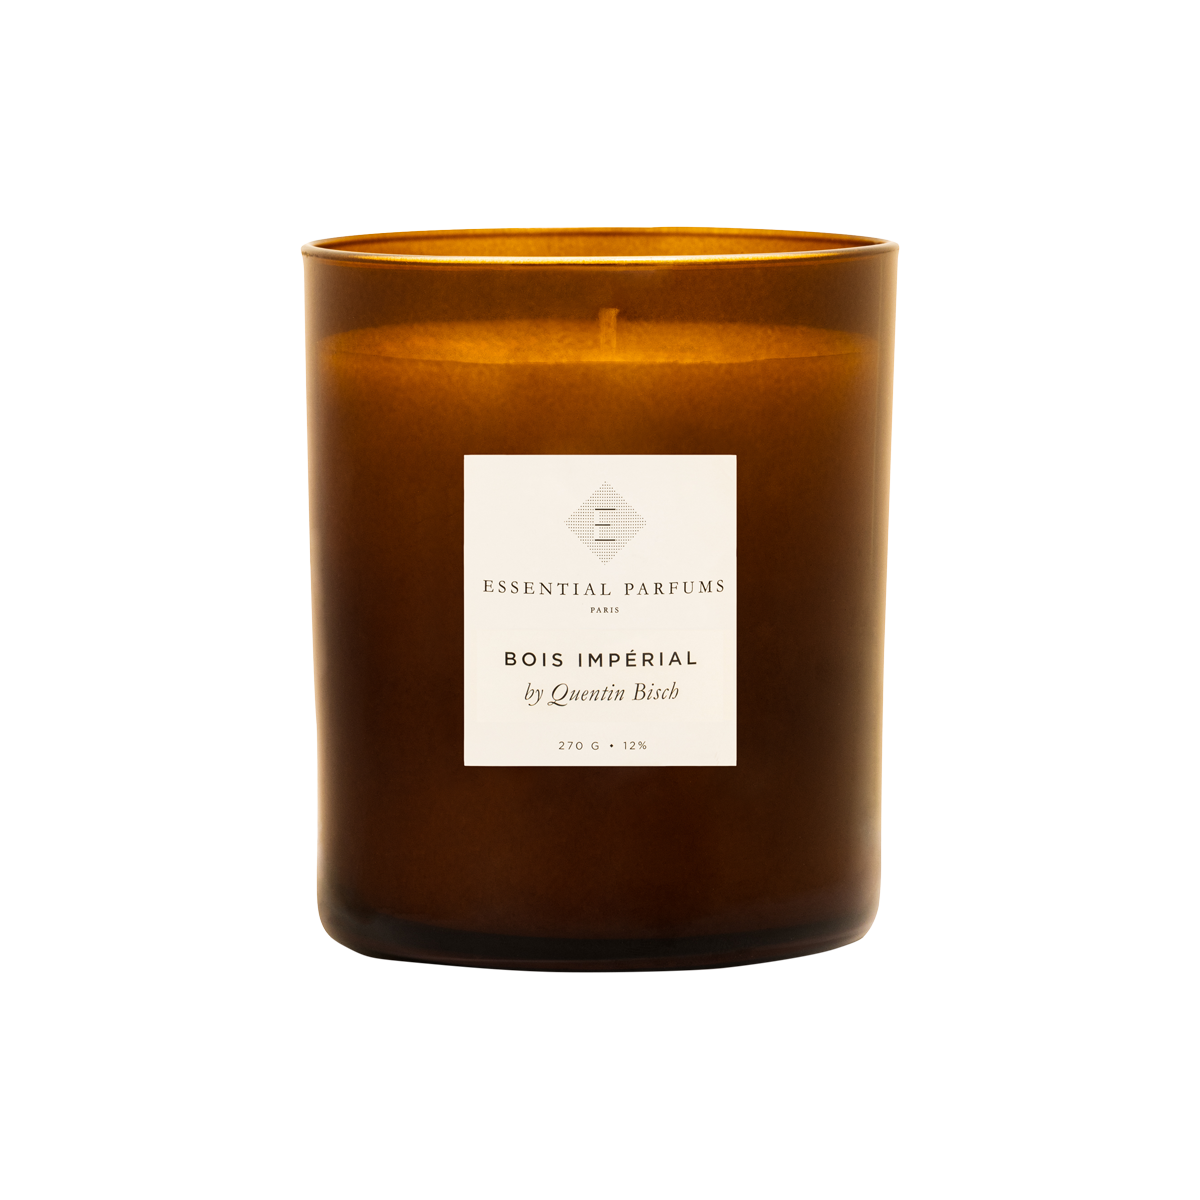 Essential Parfums - Bois Imperial Candle